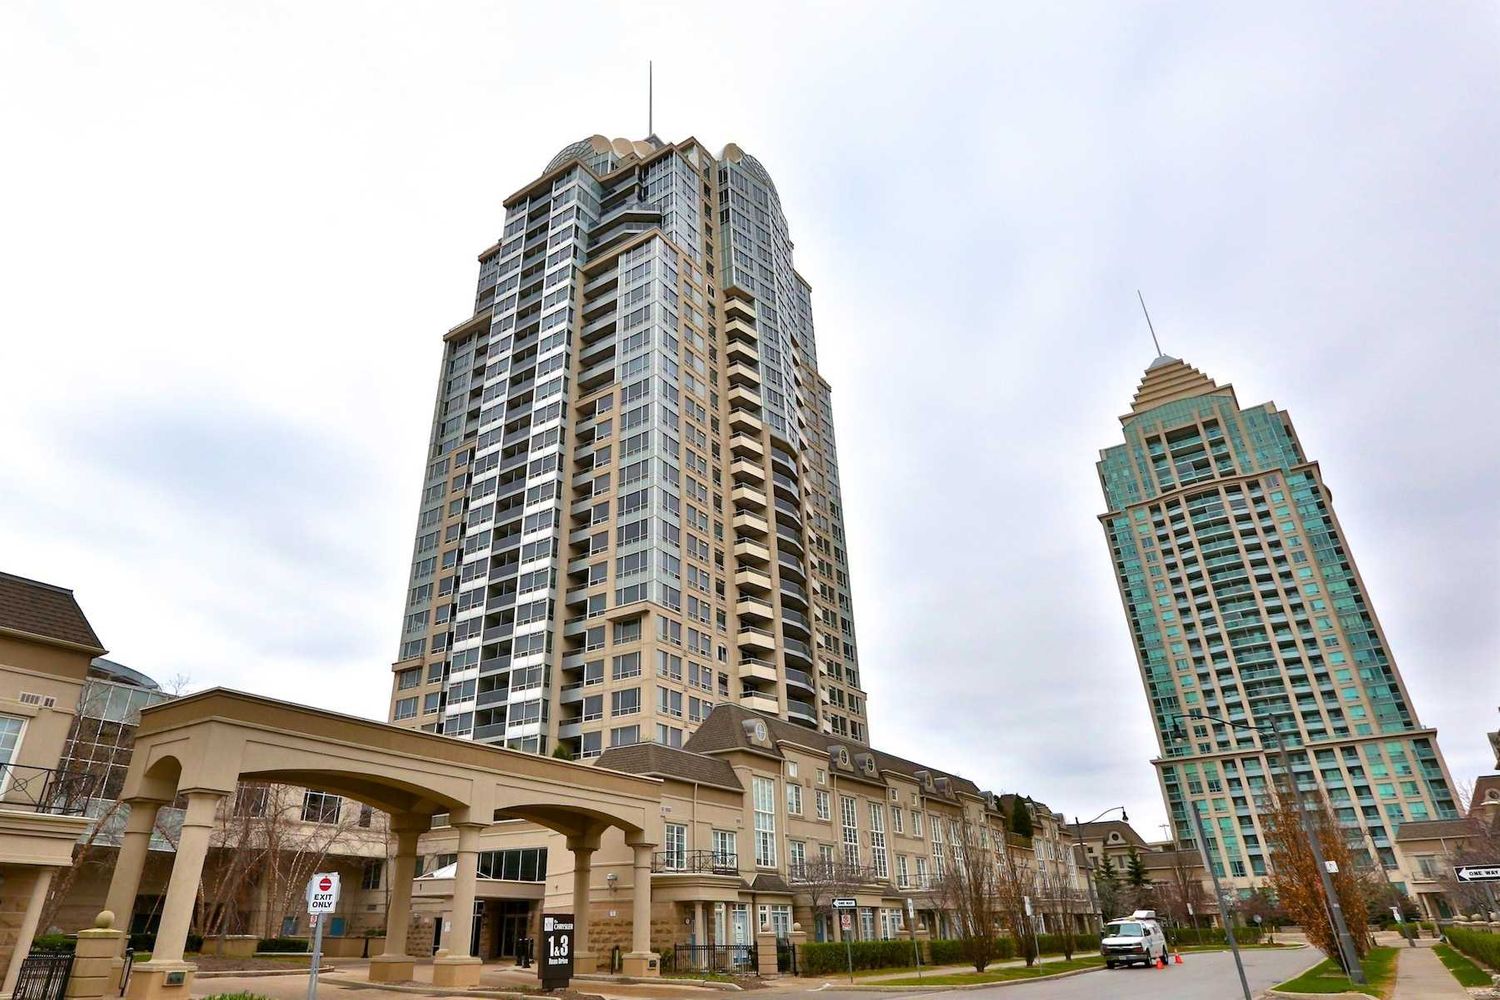 1 Rean Drive. NY Towers - The Chrysler is located in  North York, Toronto - image #1 of 2